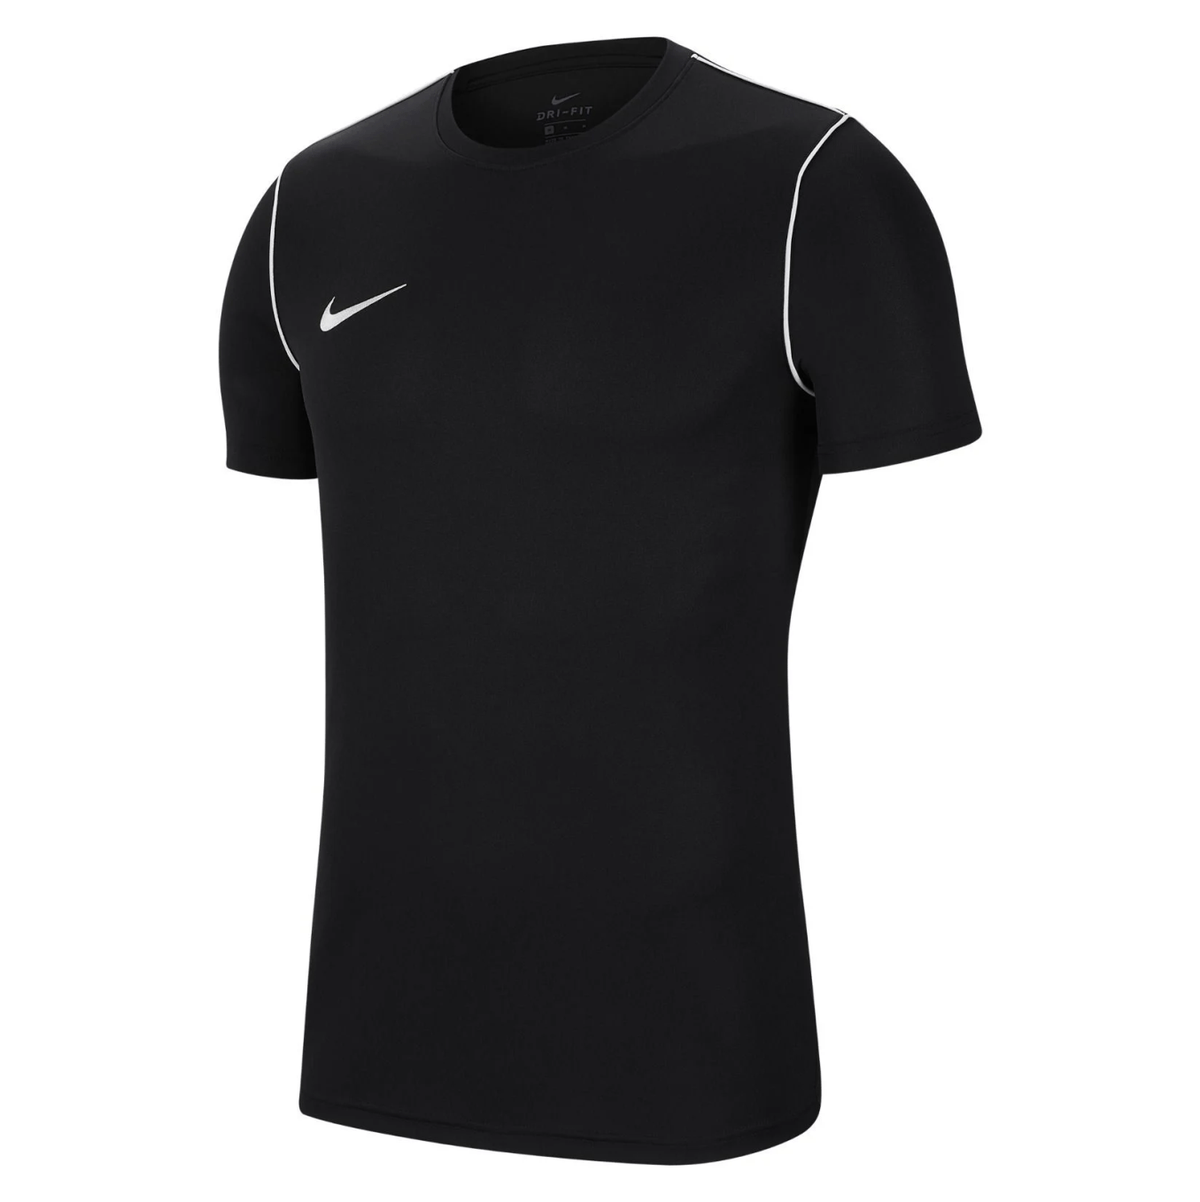 Clifton All Whites - Park 20 Training Top